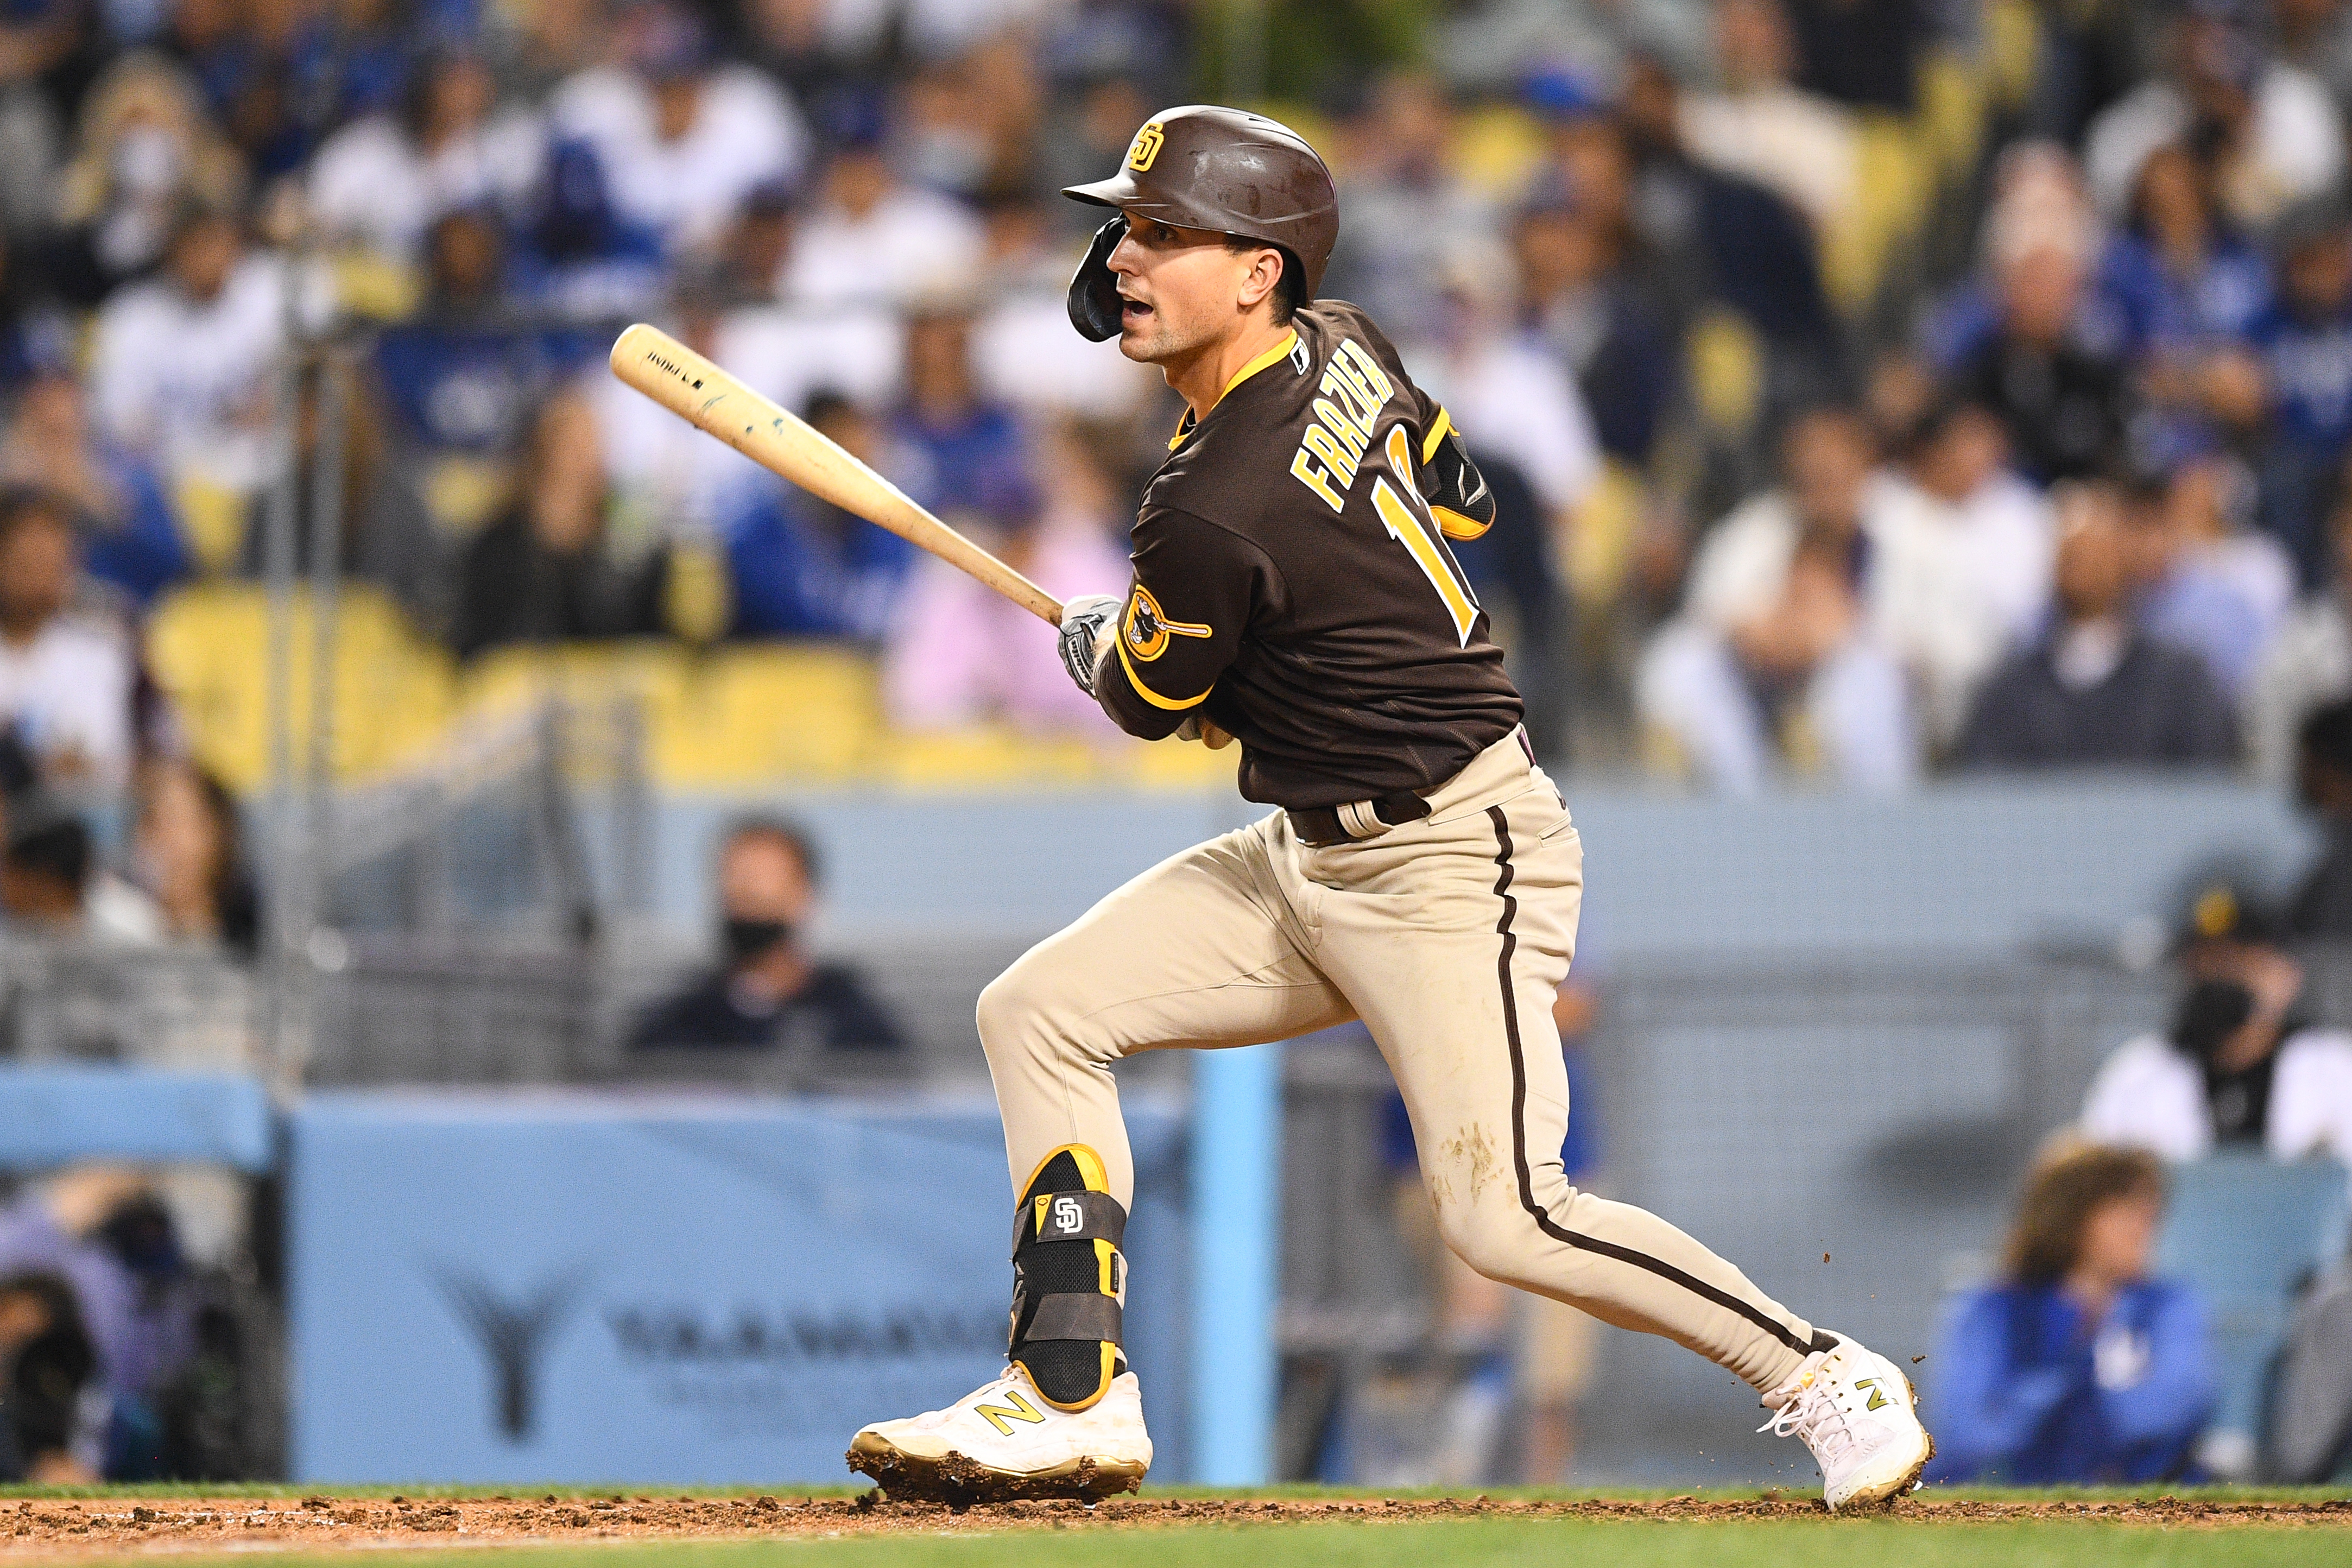 Adam Frazier traded from Pirates to Padres